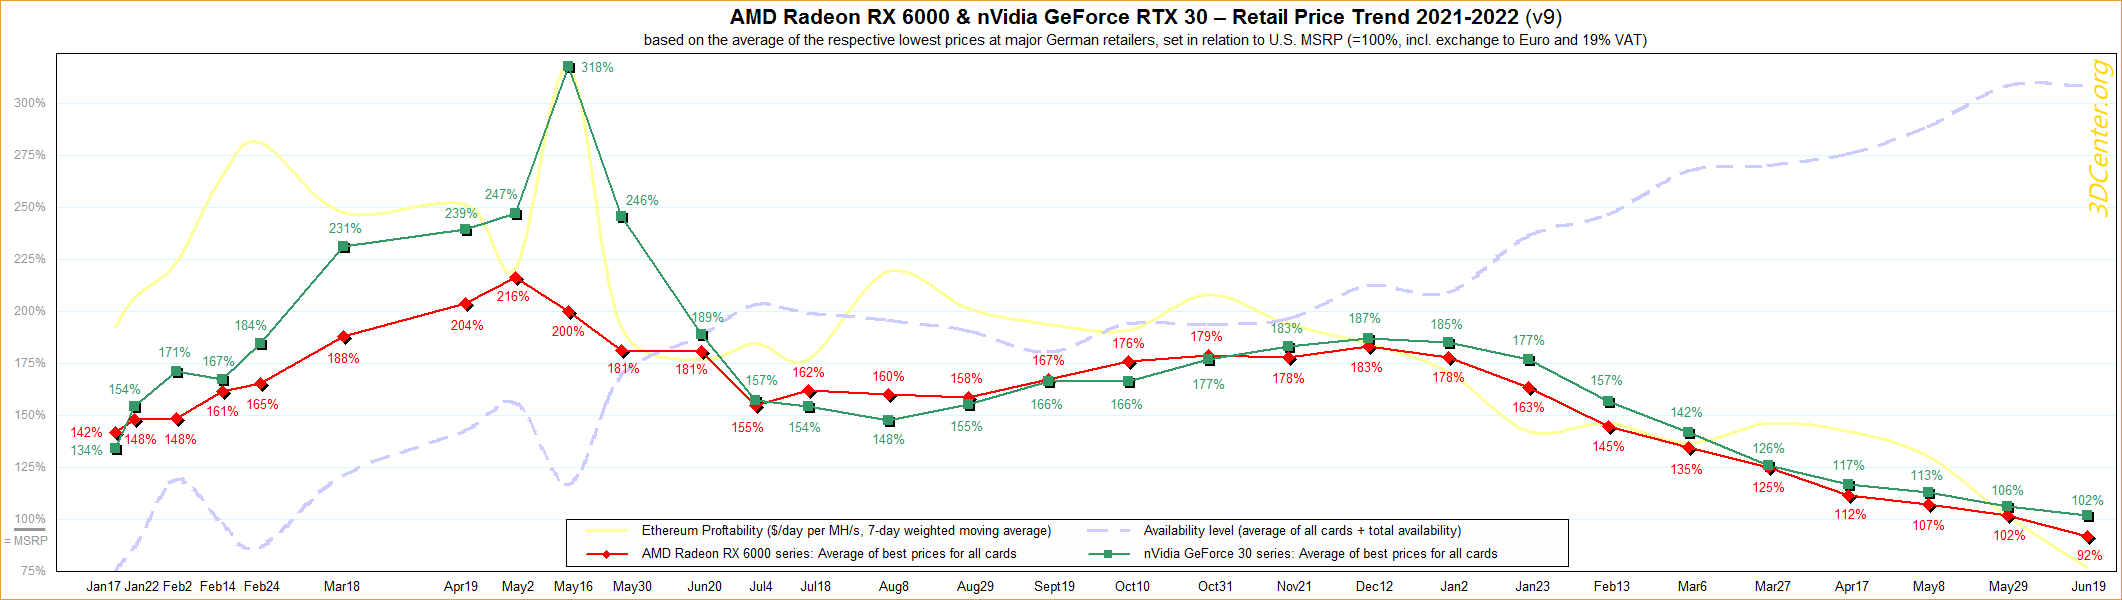 AMD-nVidia-Retail-Price-Trend-2021-2022-v9.png